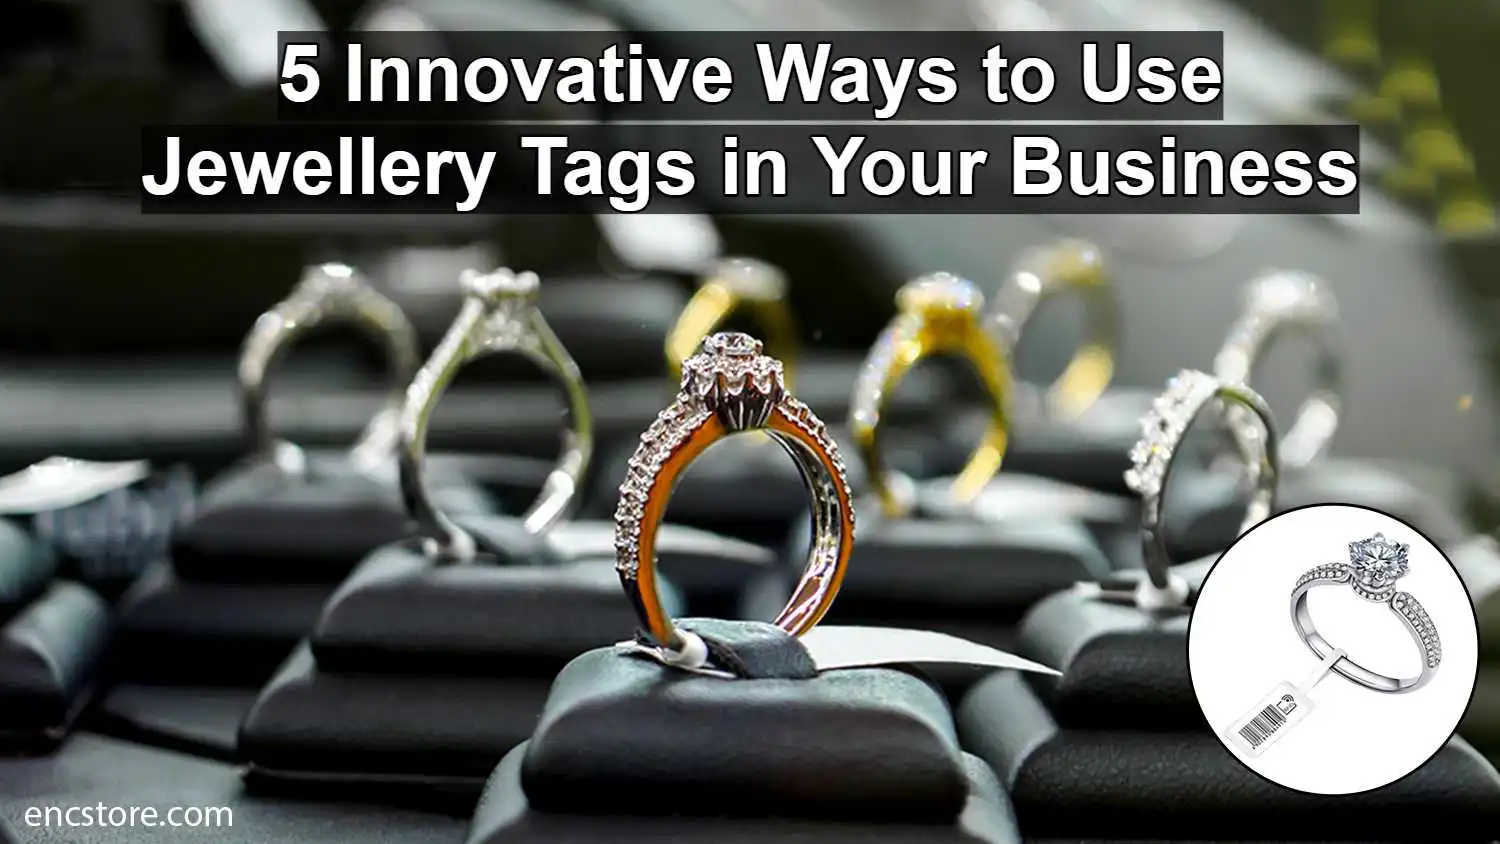 5 Innovative Ways to Use Jewellery Tags in Your Business